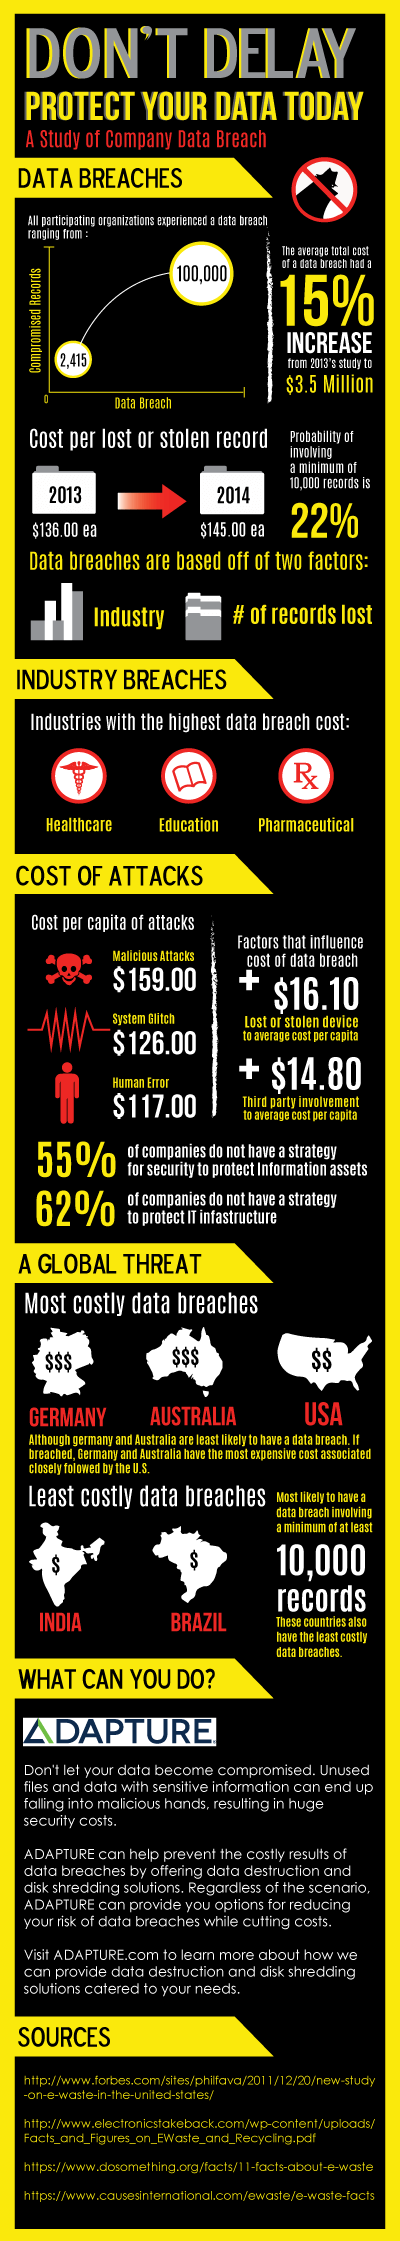 A 2014 Study of Company Data Breaches. Don’t delay protect your data today: a study of company data breach. All participating organizations experienced a data breach ranging from 2,415 to 100,000 compromised records. The average total cost of a data breach had a 15% increase from 2013’s study to $3.5 million. In 2013, the cost per lost or stolen record was $136 each. In 2014, the cost per lost or stolen record is $ 145. Probability of a data breach involving a minimum of 10,000 records is 22%. Data breaches are based off of the industry and the number of records lost. The industries with the highest data breaches costs are healthcare, insurance, and pharmaceutical. The cost per capita of attacks from malware is $159, from a system glitch is $126, and from human error is $117. There is an additional $16.10 for lost or stolen devices to average cost per capita, and there is an additional $14.80 for third party involvement to average cost per capita. 52% of companies do not have a strategy for security to protect information assets. 62% of companies do not have a strategy to protect IT infrastructure. Although Germany and Australia are the least likely to have a data breach, if breached, Germany and Australia would have the most expensive cost associated closely followed by the US. While India and Brazil are the most likely to have a data breach that involves a minimum of at least 10,000 records, these countries also have the least costly data breaches. 